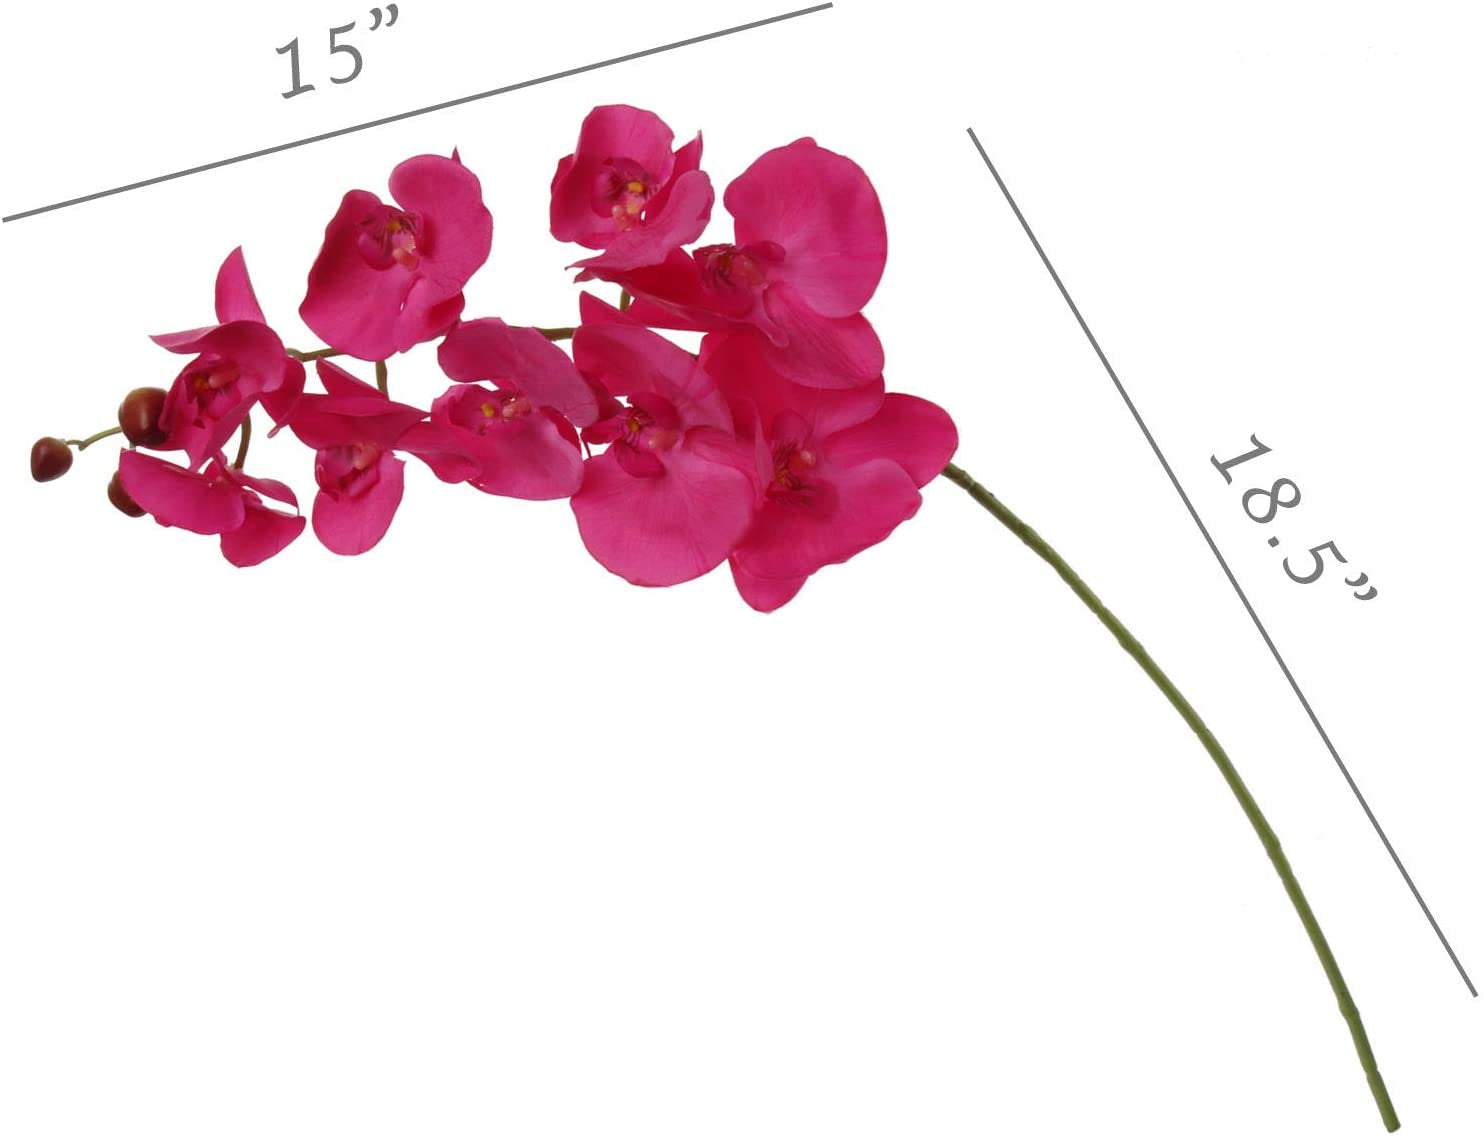 Artificial Real Touch Silk Phalaenopsis Orchid 9 Flowers 3 Buds- 34" (2 Pieces) Orchid artificialflowersdotcom   